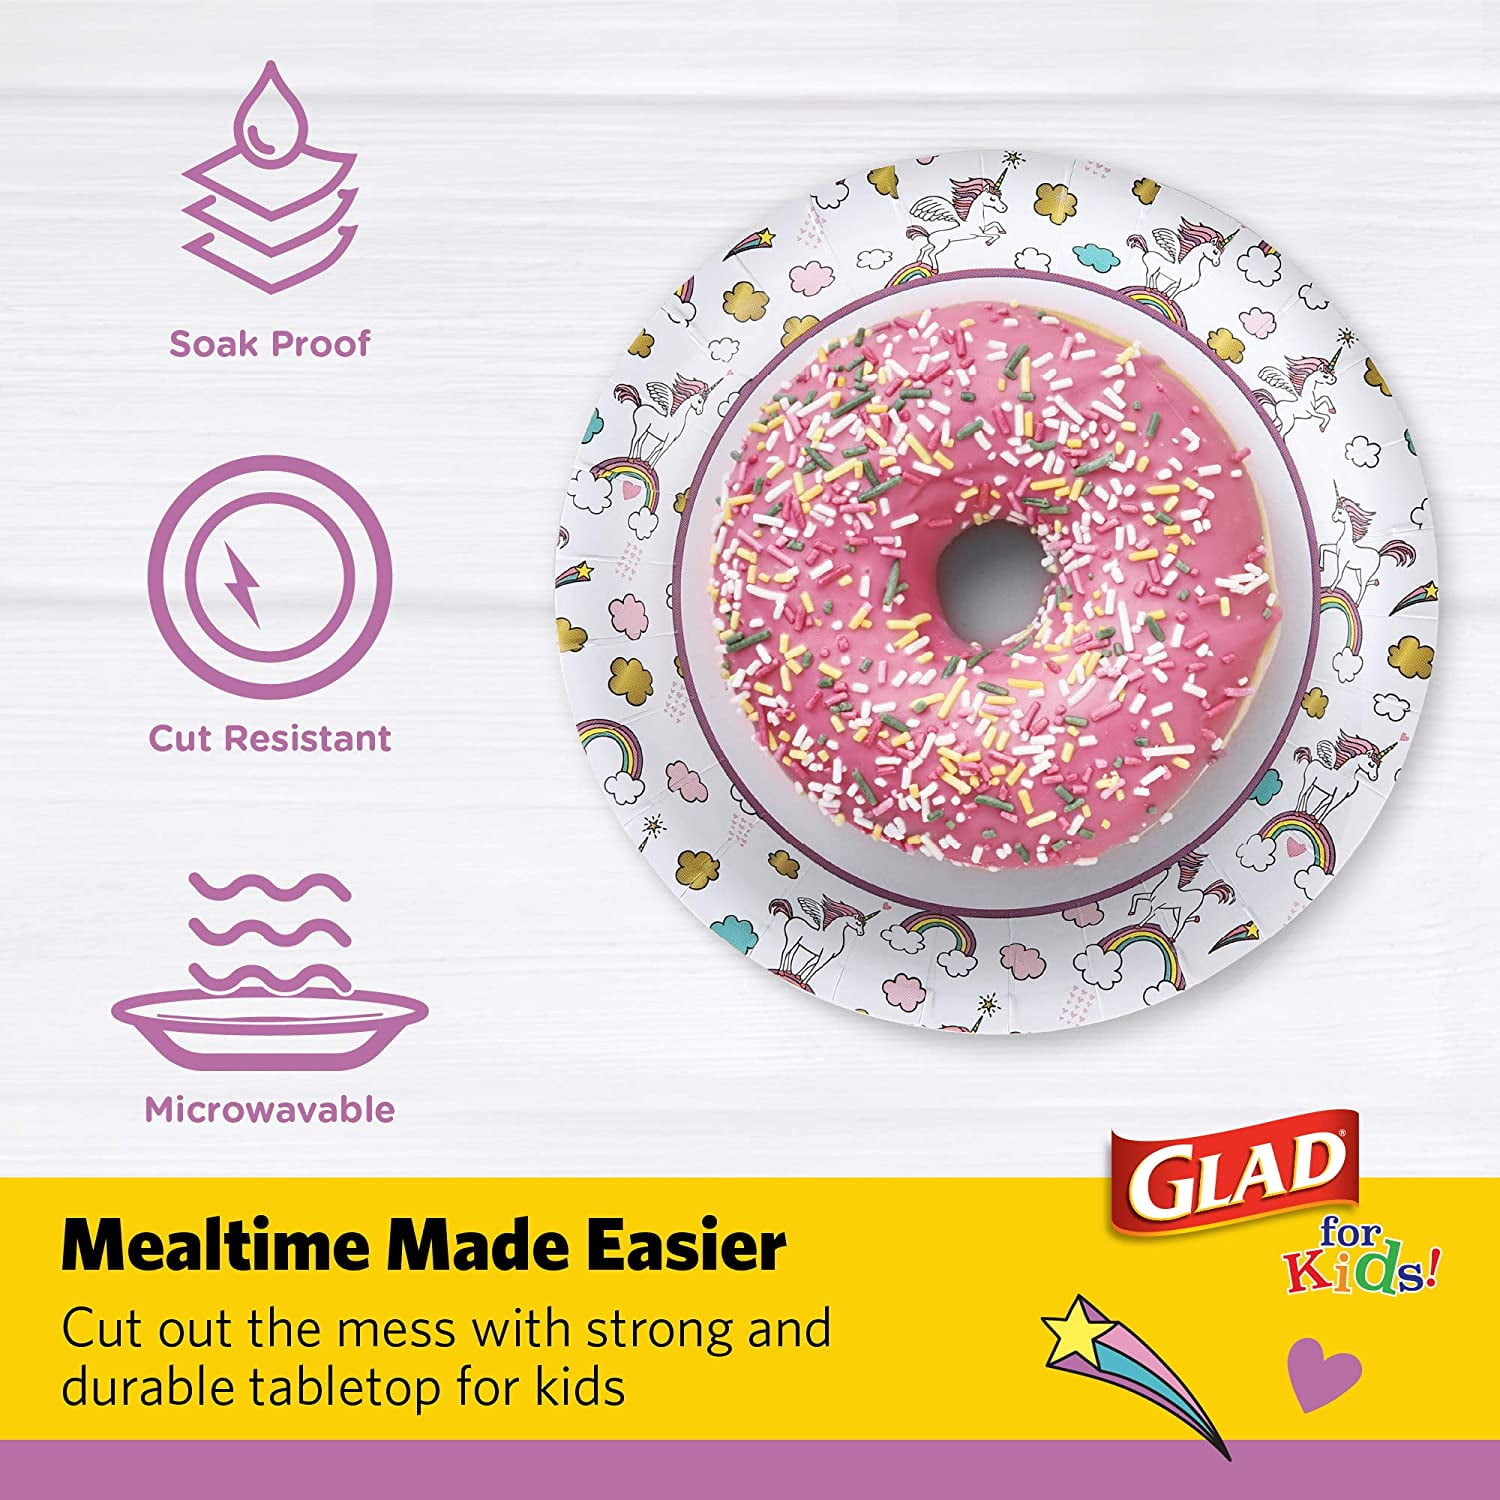 Glad for Kids 7-Inch Paper Plates | Small Blue Round Paper Plates with Paw Patrol Design | 20 ct Heavy Duty Disposable Soak Proof Microwavable Paper